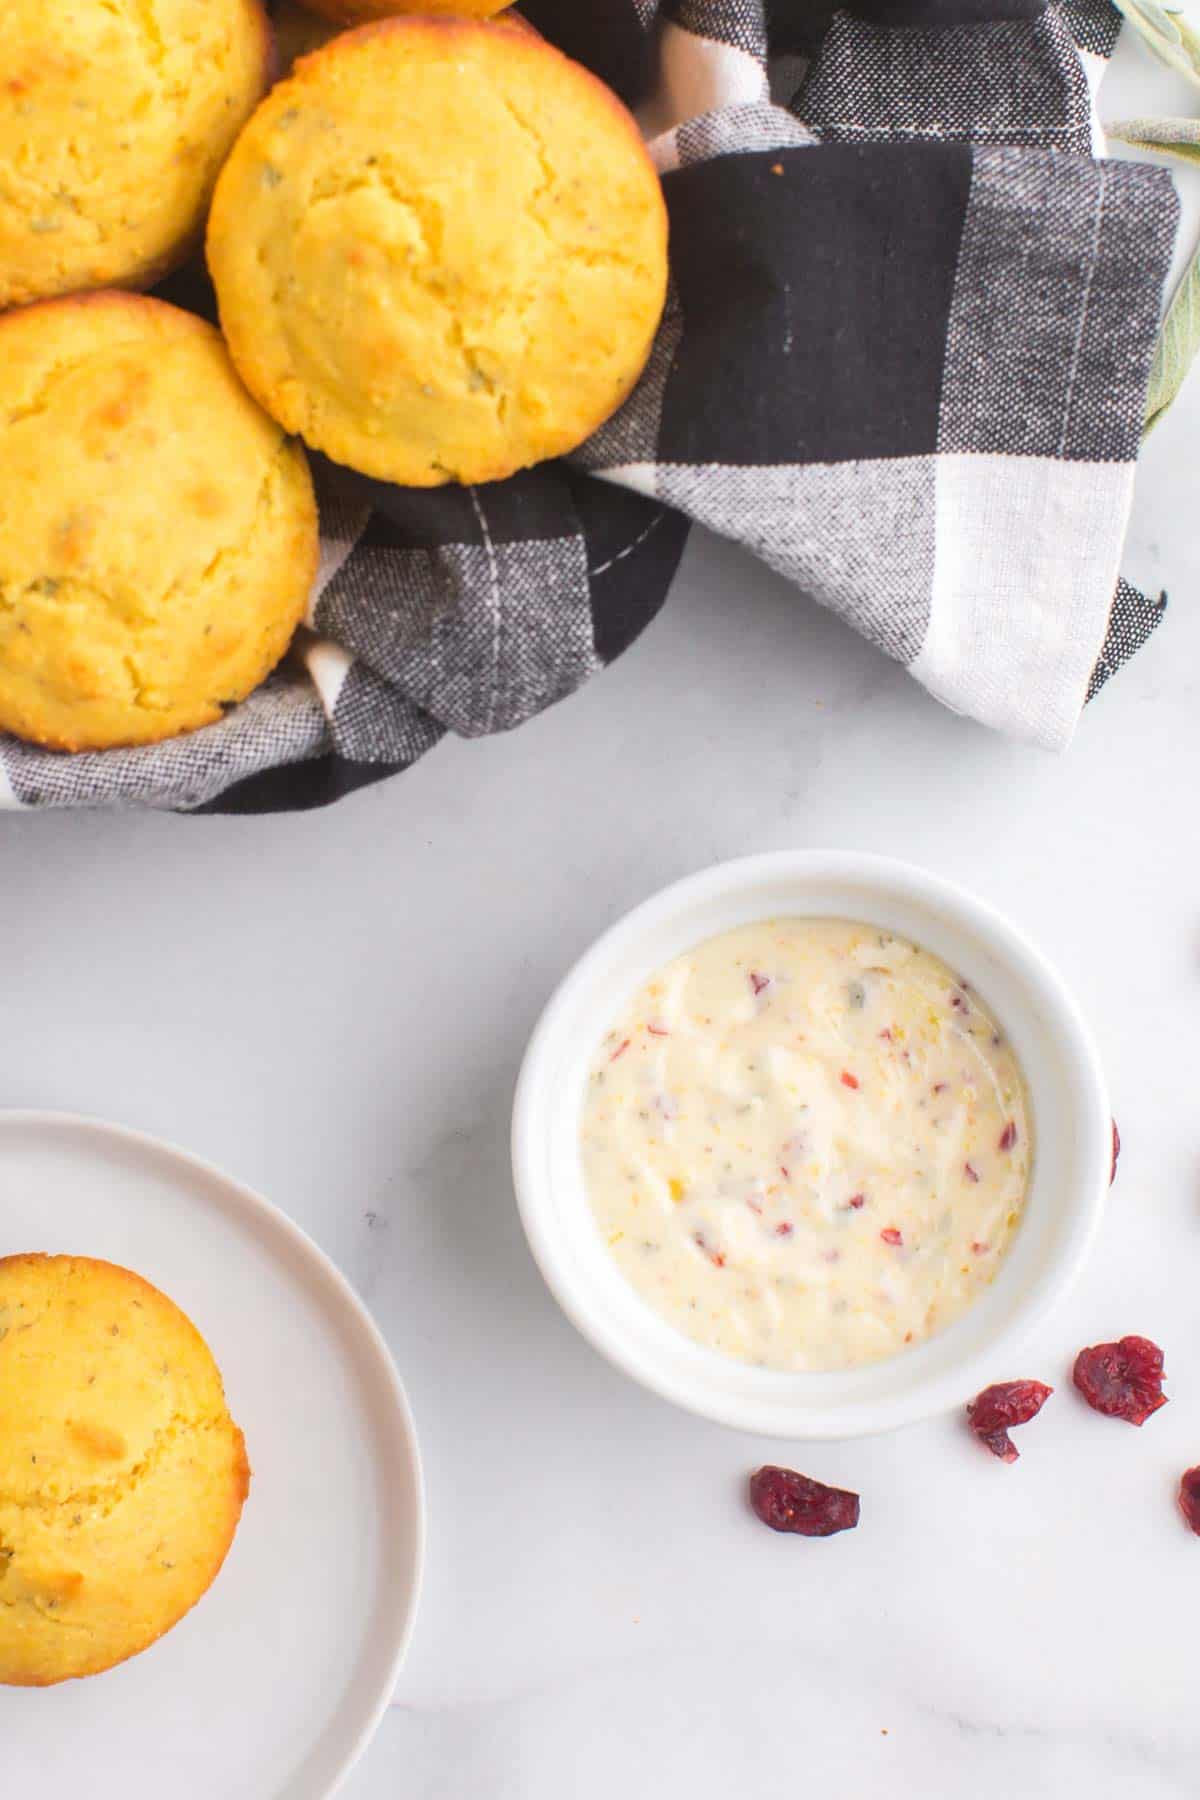 a dish of cranberry orange butter on a table with a basket of corn muffins and one on a plate